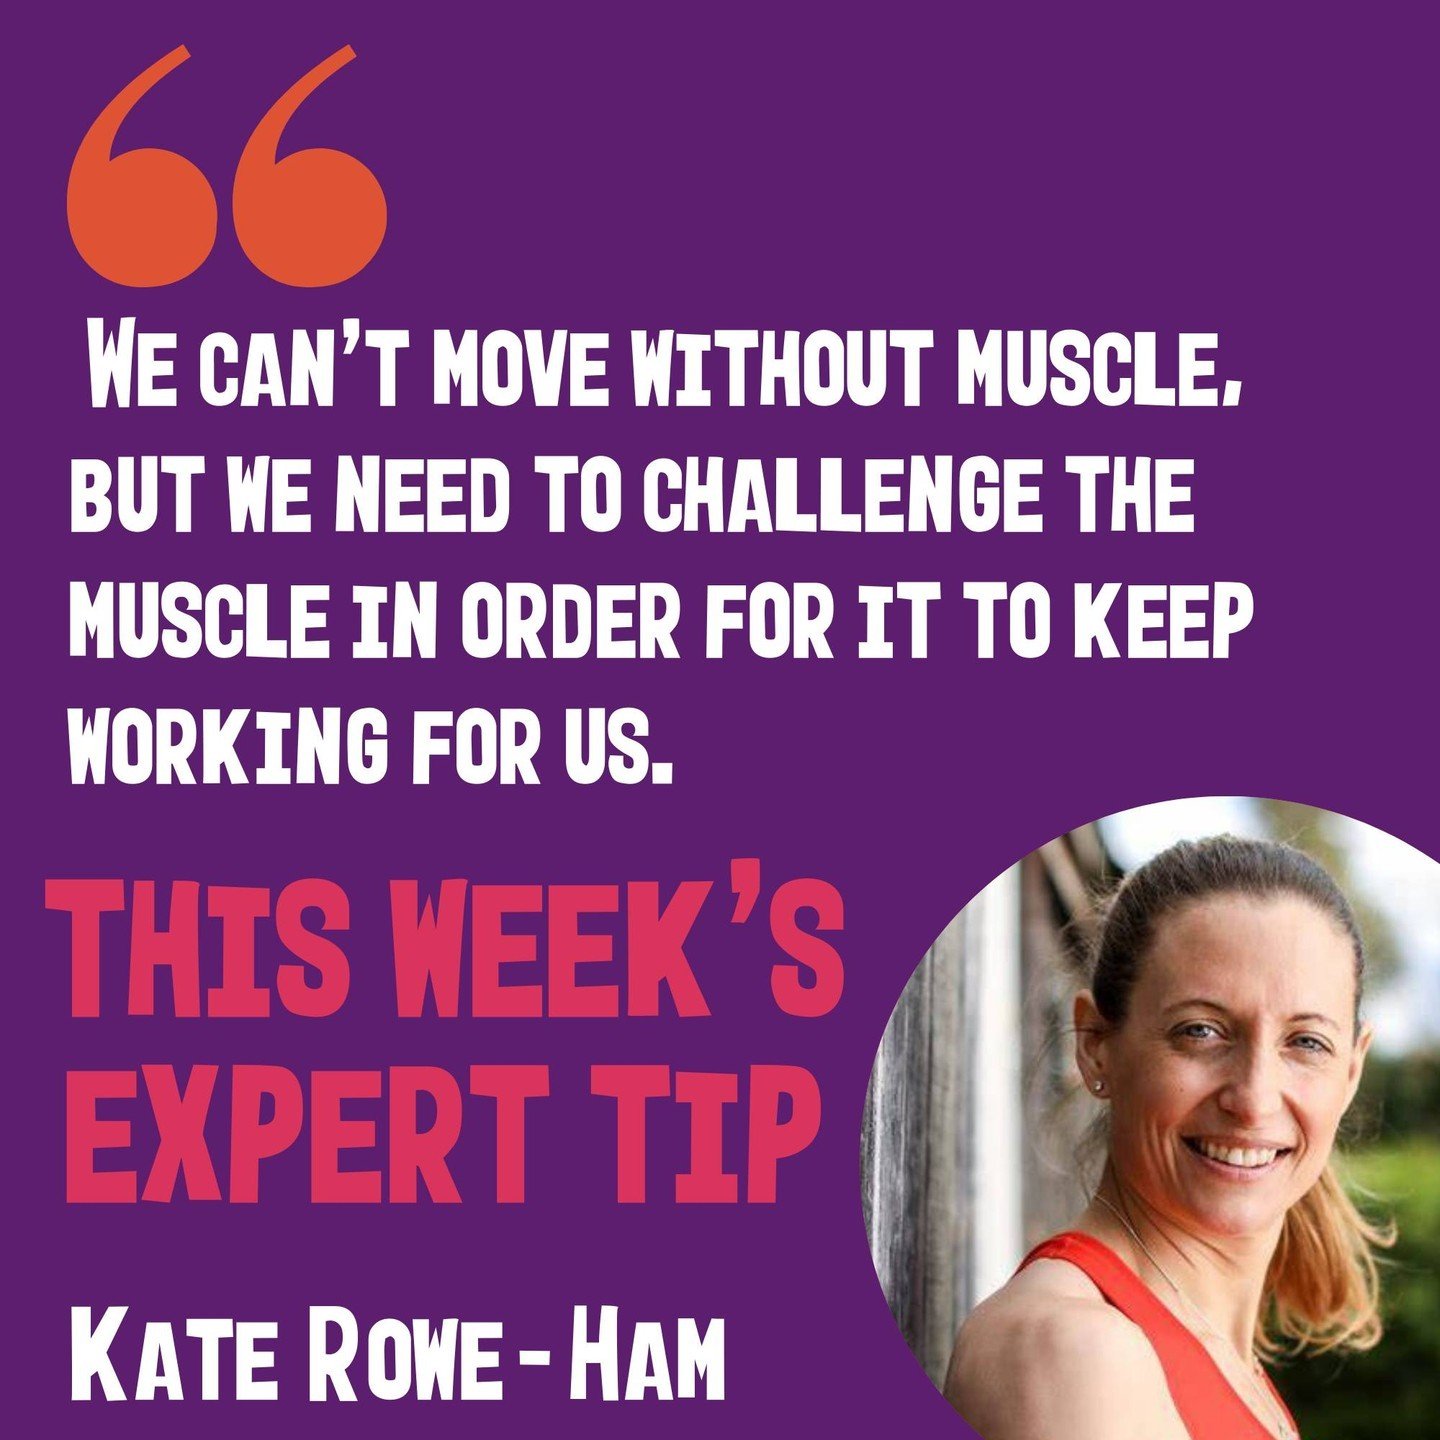 Kate Rowe-Ham is a Women's Health Coach with a special interest in menopause fitness and nutrition. She is also the founder of @OwningYourMenopause.

Kate is passionate about educating women on how to exercise at this time and how movement and diet g